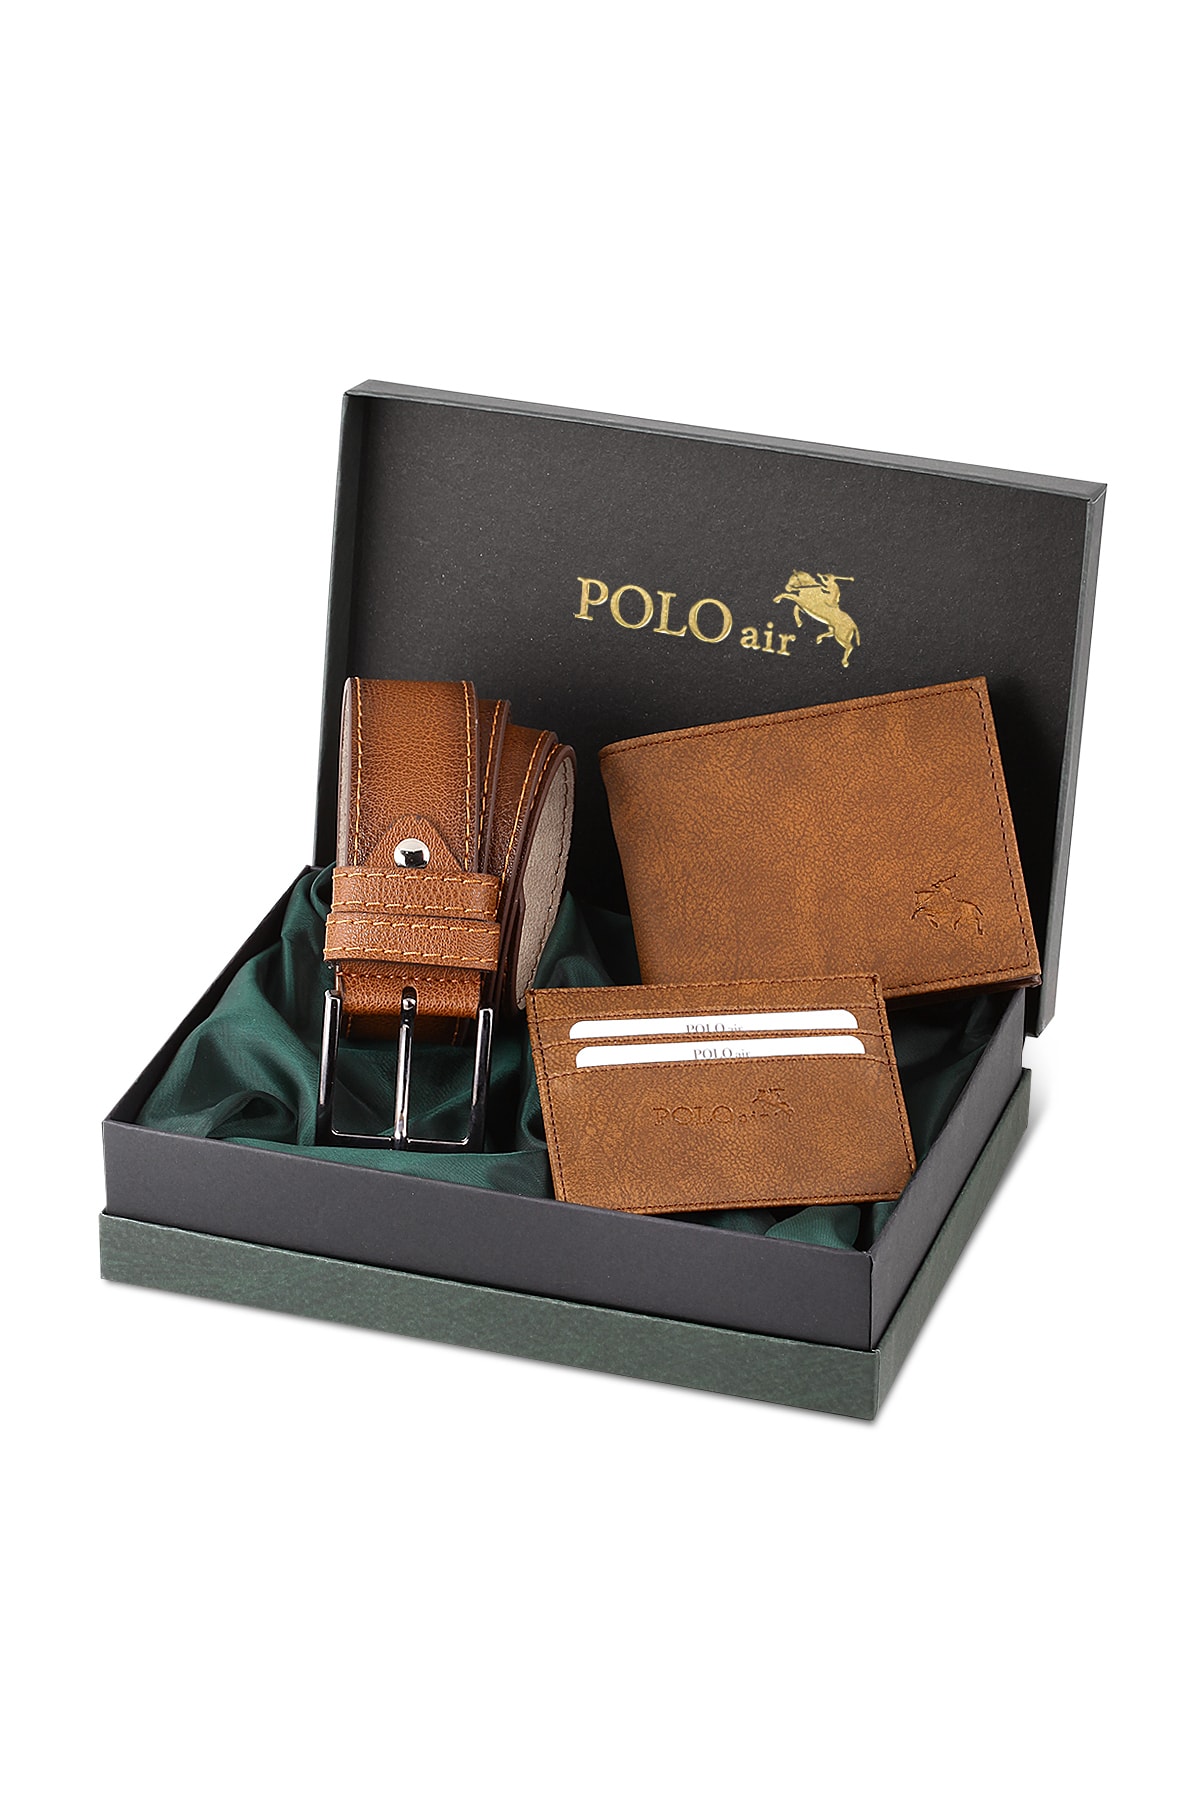 Polo Air Belt Wallet Card Holder Tan Set In Gift Box